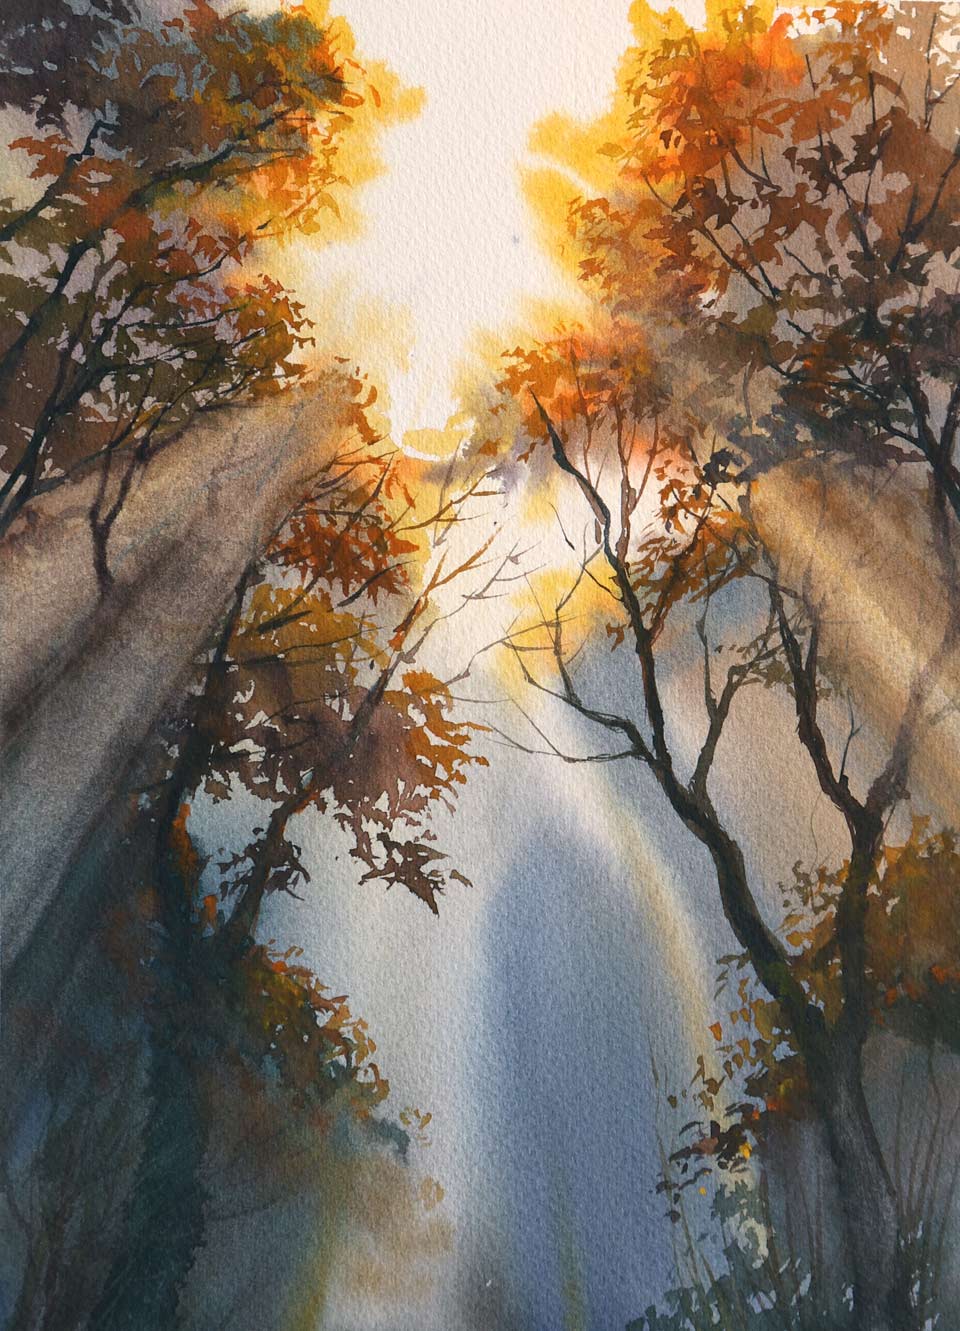 Drawing with Clean Water Watercolor Painting Technique - Article by Vladimir London, Watercolor Academy tutor